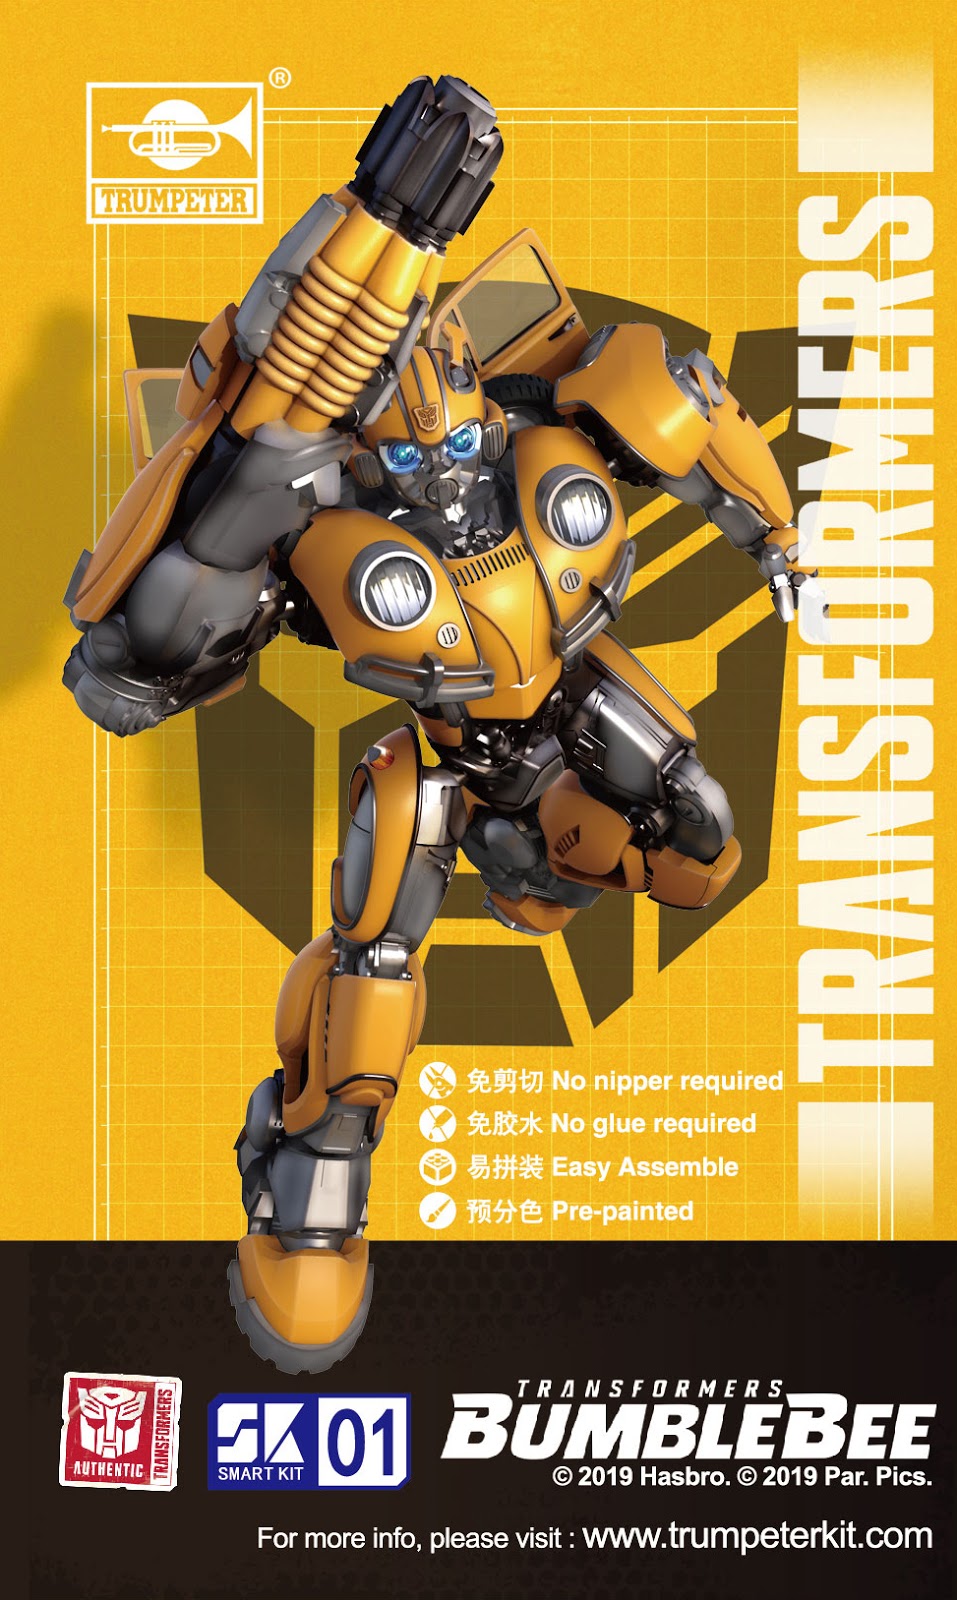 Details about   Trumpeter Transformers Bumblebee Smart Kit Assemble Model Plastic Toys Yellow